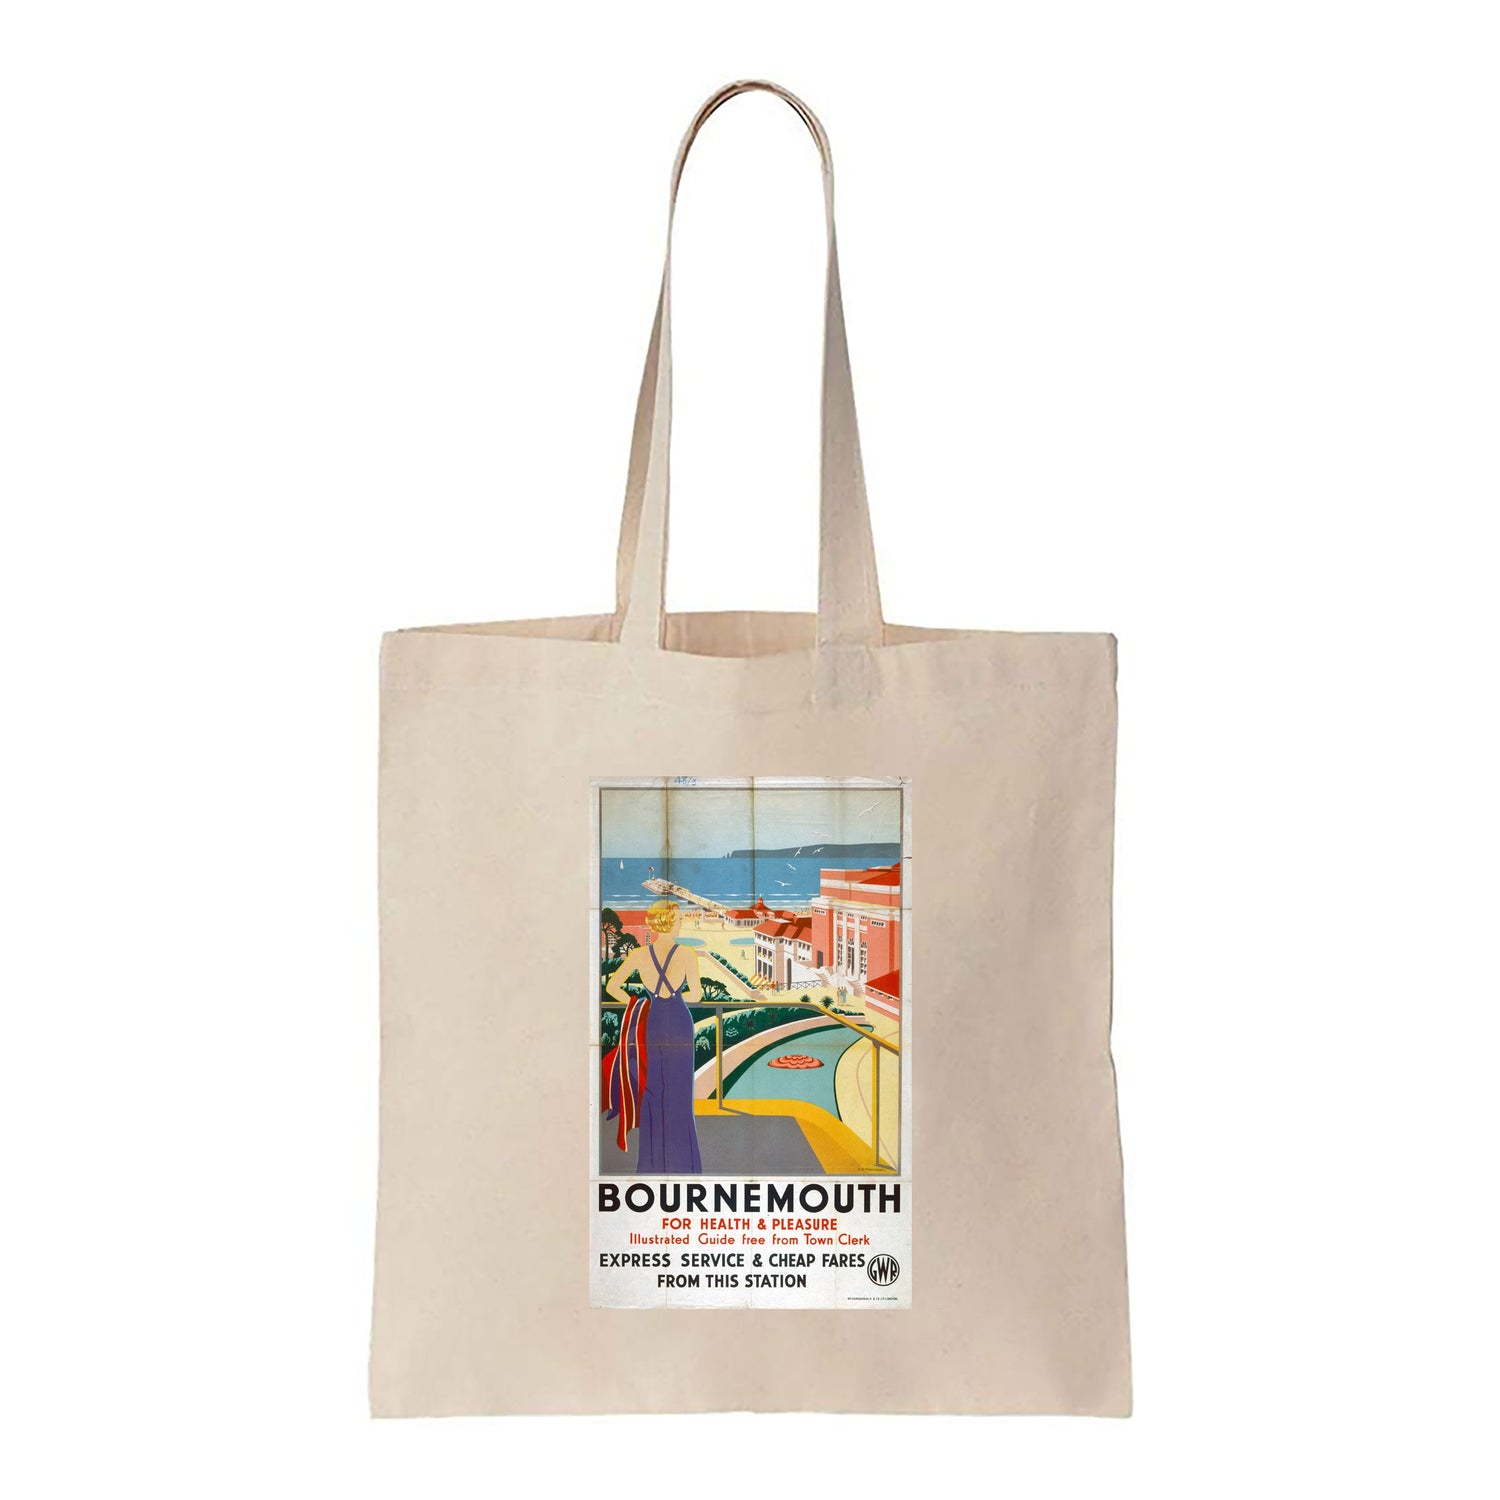 Bournemouth for health and pleasure - GWR - Canvas Tote Bag